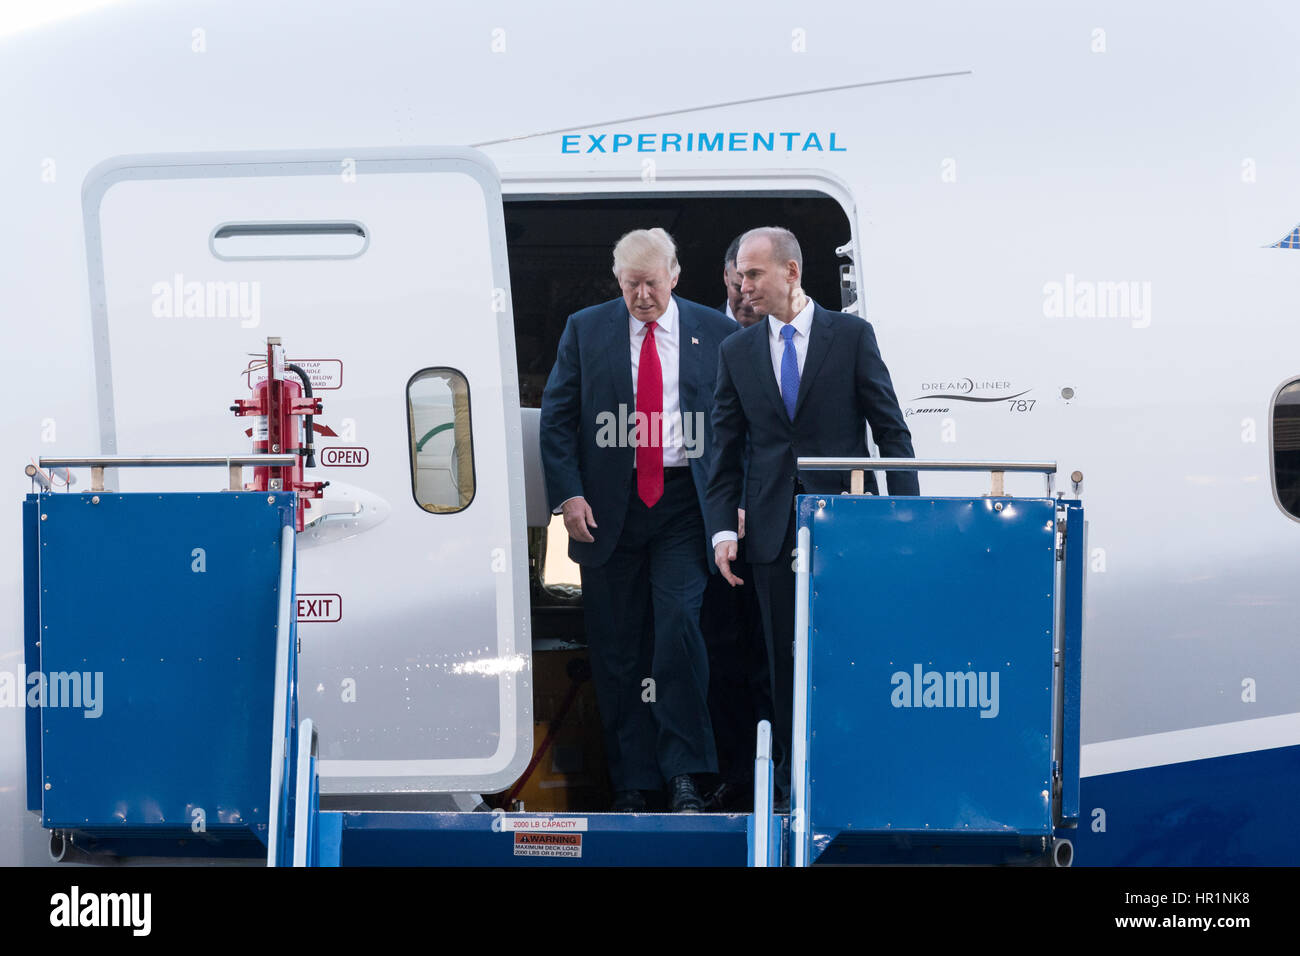 U.S. President Donald Trump with Boeing CEO Dennis Muilenburg, right, after touring the new Boeing 787-10 Dreamliner aircraft at the Boeing factory February 17, 2016 in North Charleston, SC. Trump is at the factory for the rollout of the new aircraft. Stock Photo